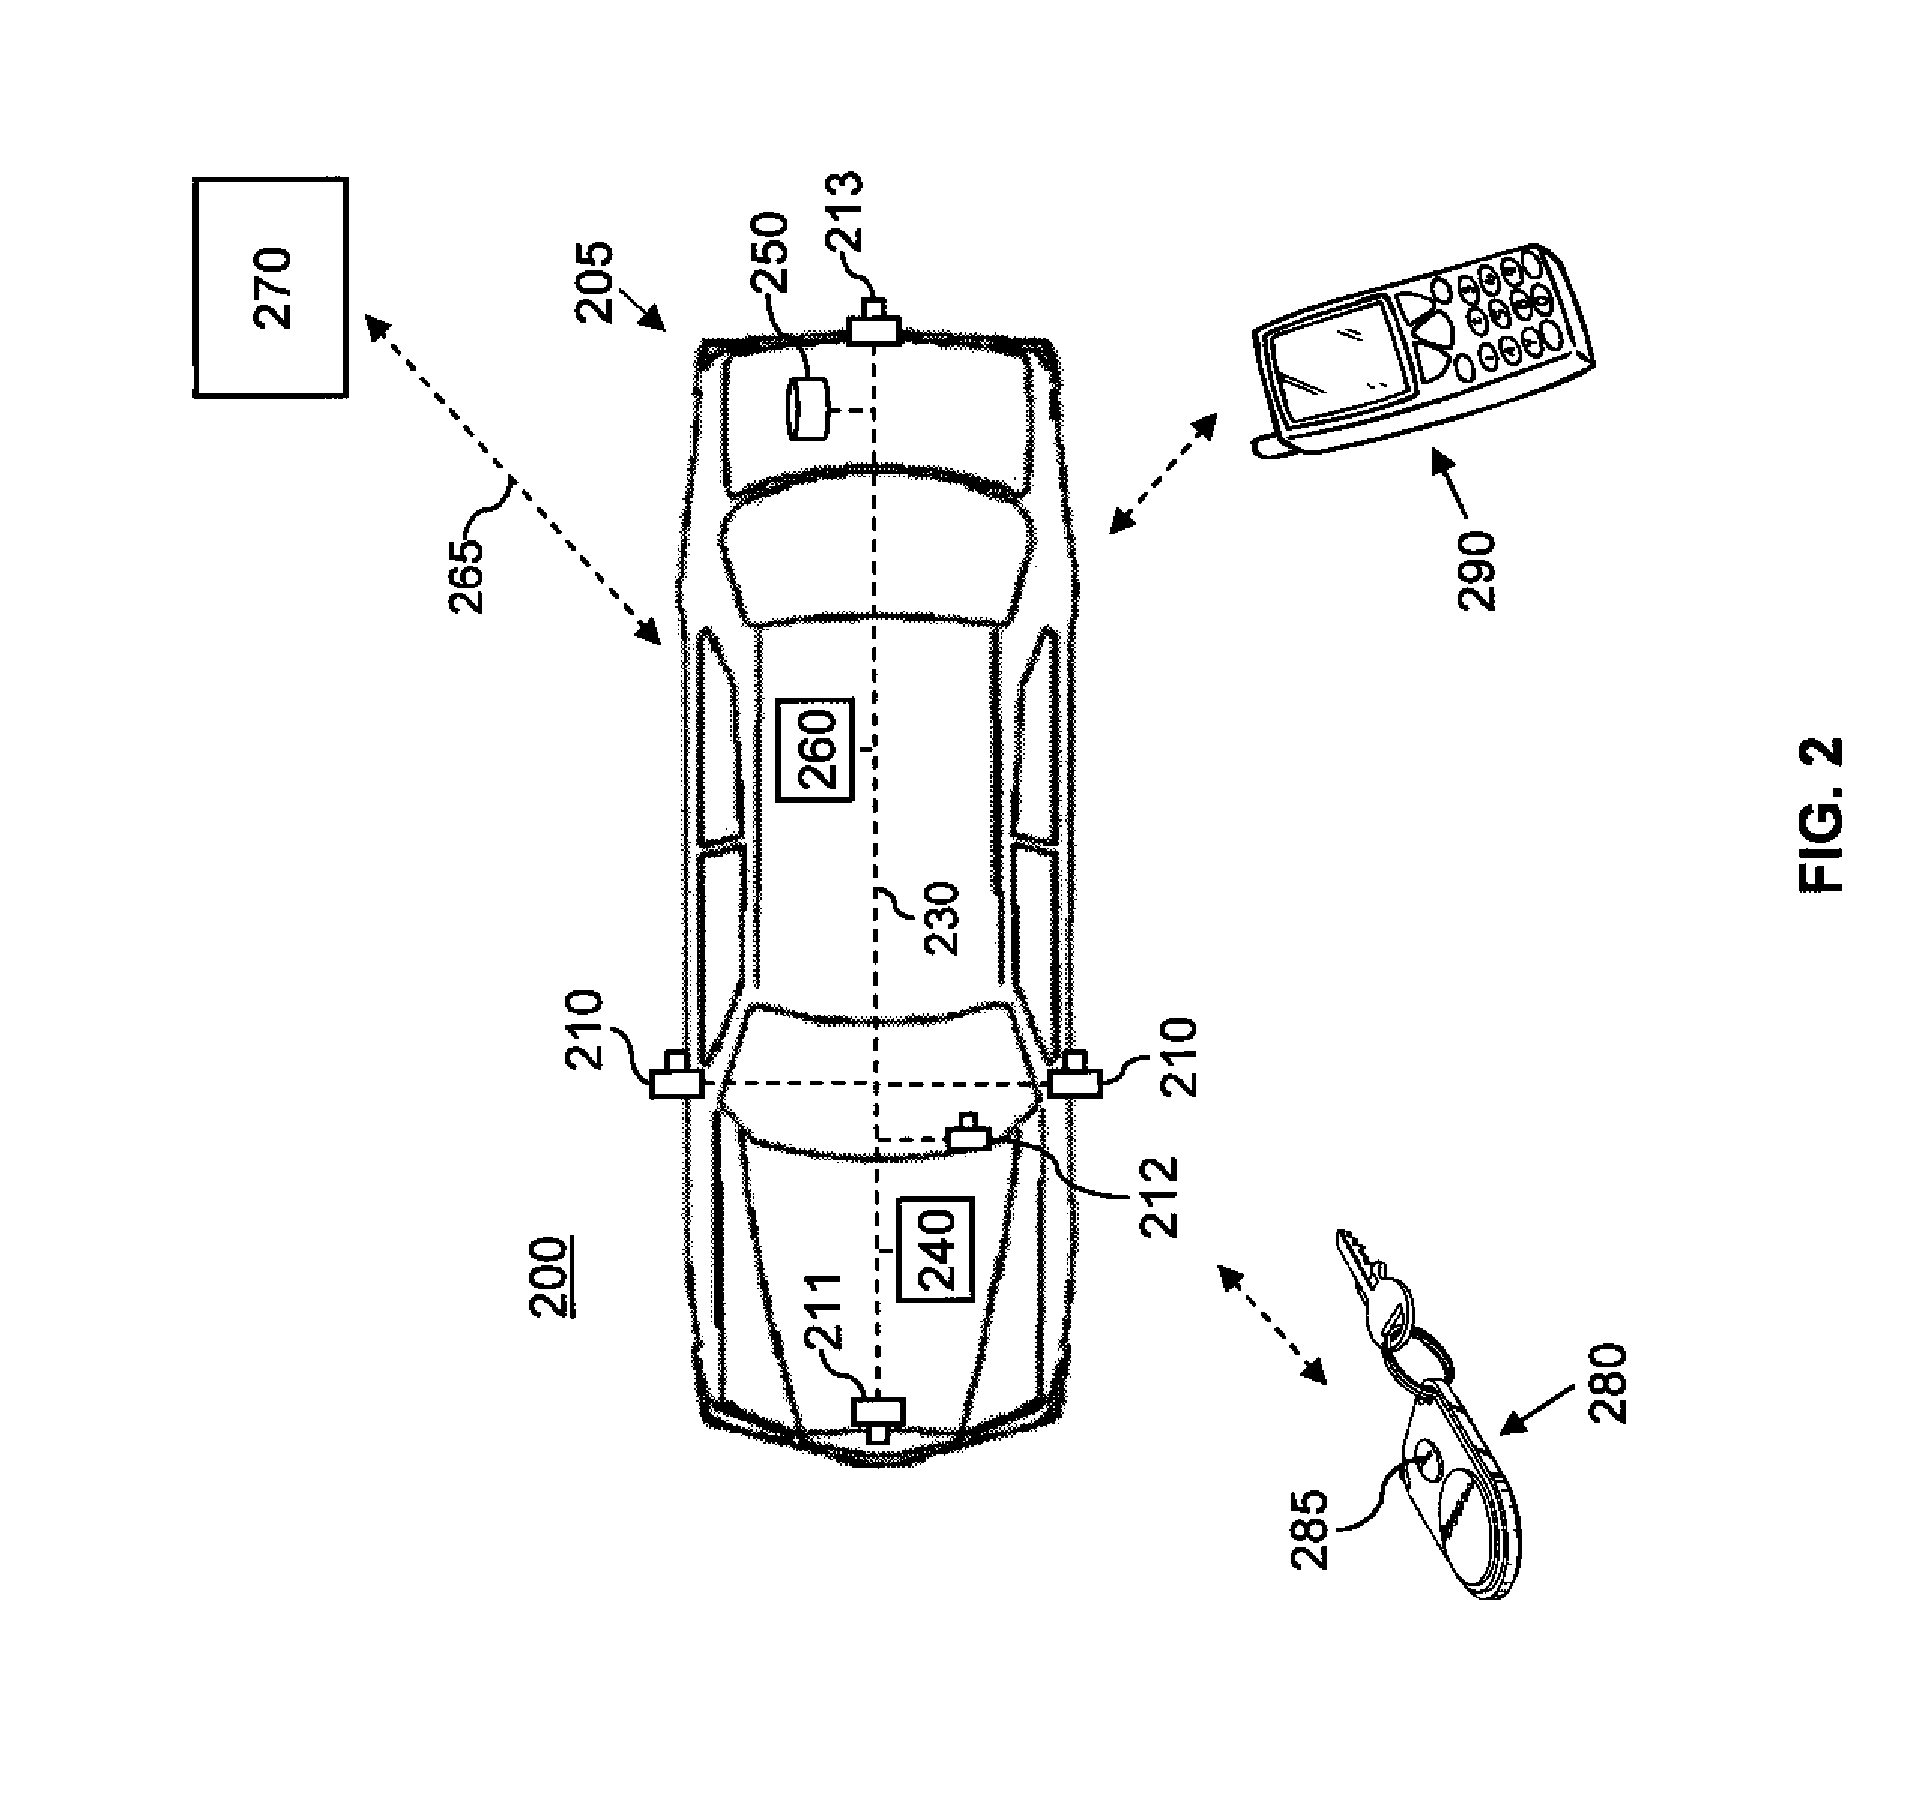 Automotive imaging system for recording exception events